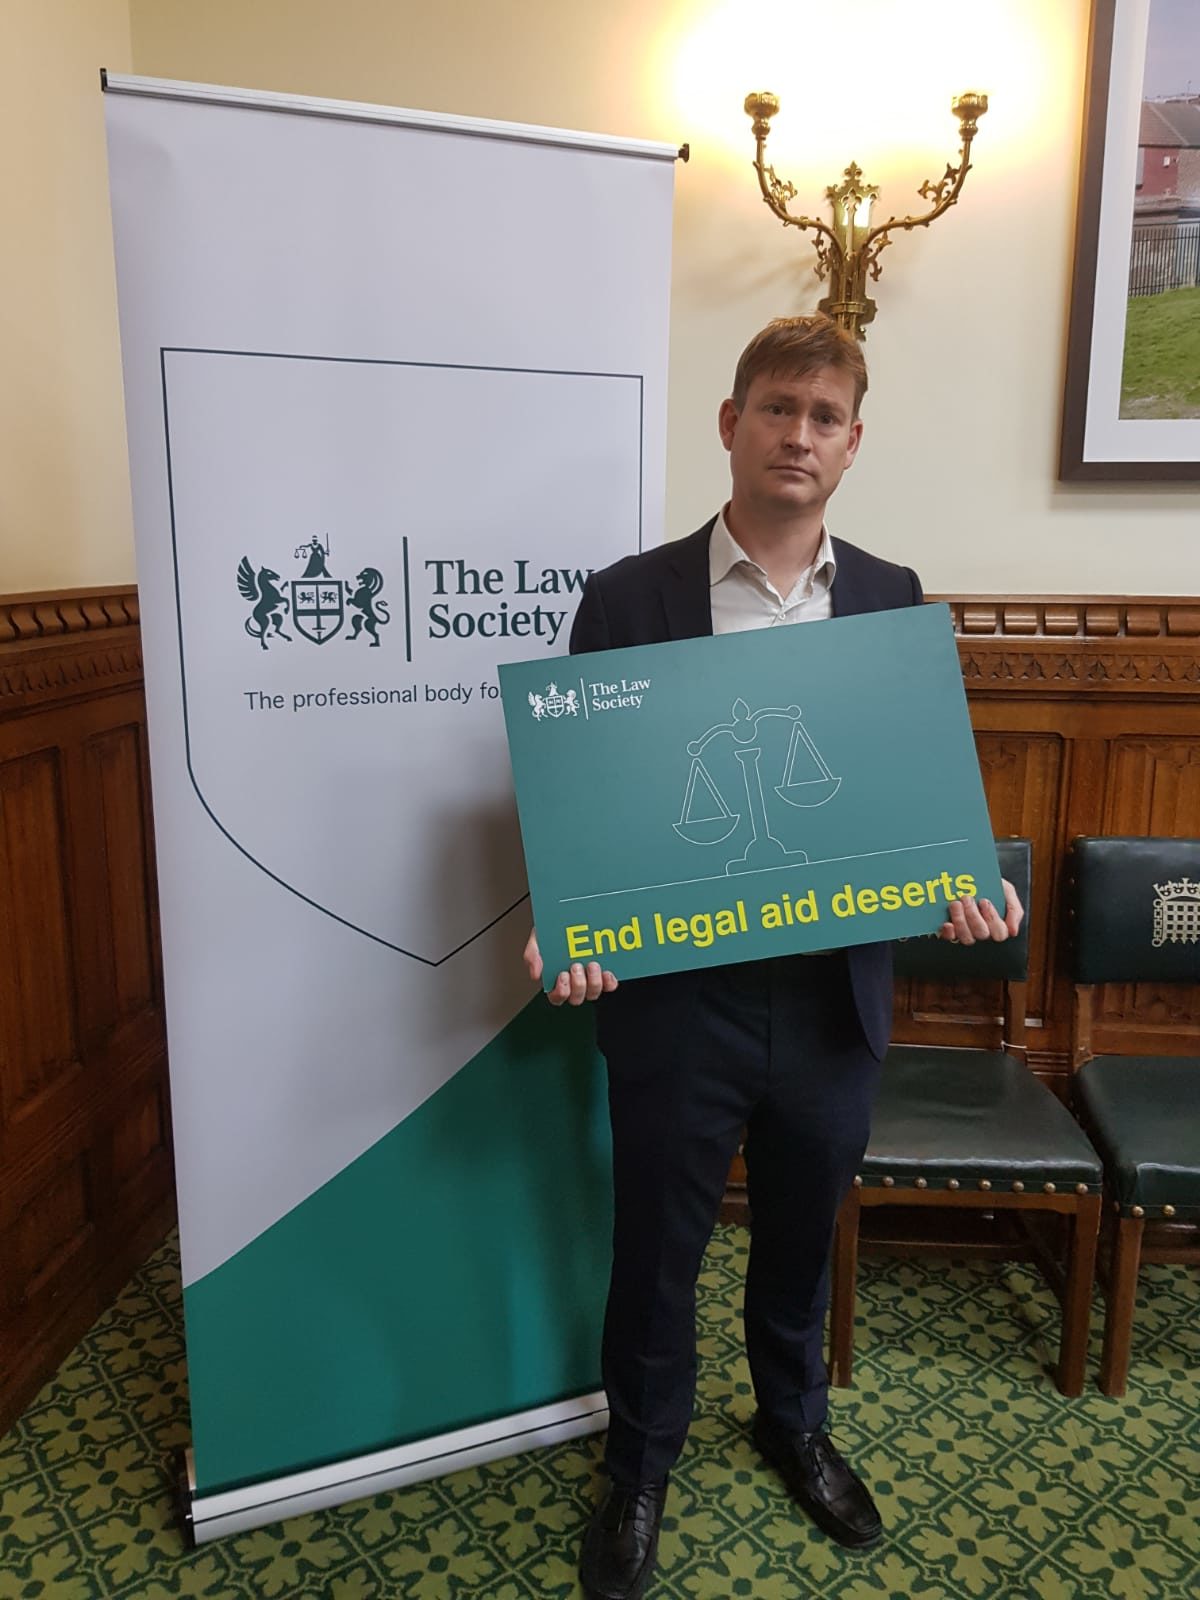 Justin Madders MP backs call to end legal aid deserts